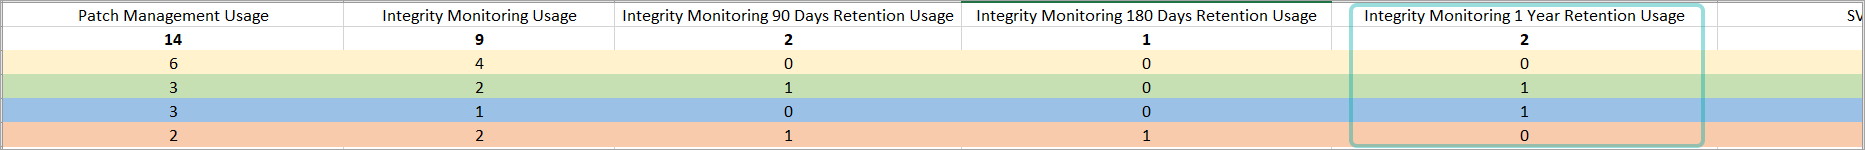 monthly__integritymonitoring_18year_usage_340181_en.png